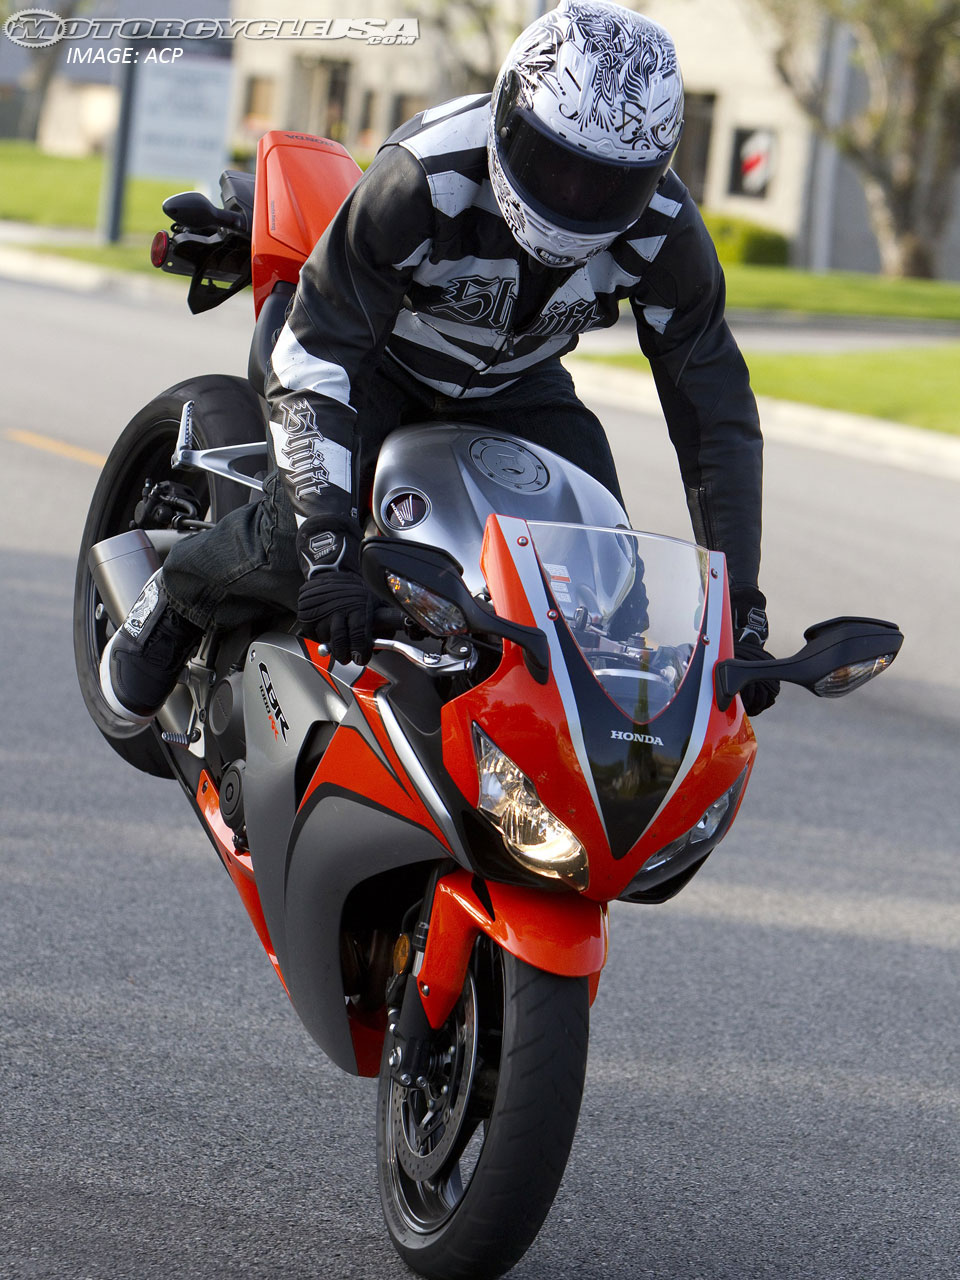 Honda Cbr1000rr Street Smackdown Picture Of Motorcycle